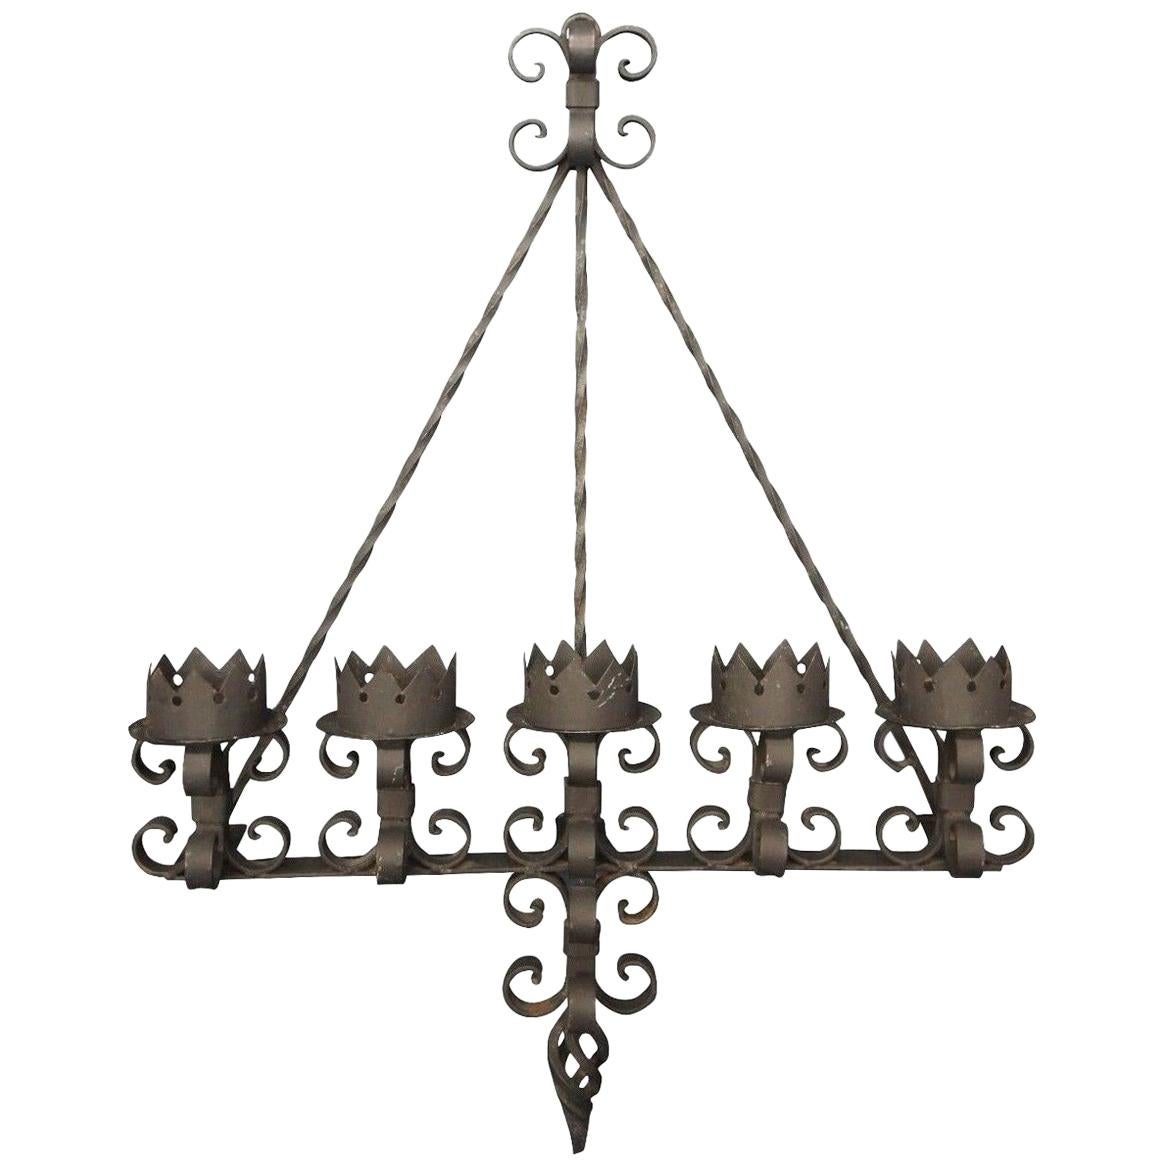 Spanish Revival Brutalist Iron Gothic Wall Sconce 5-Light Candle Candelabra